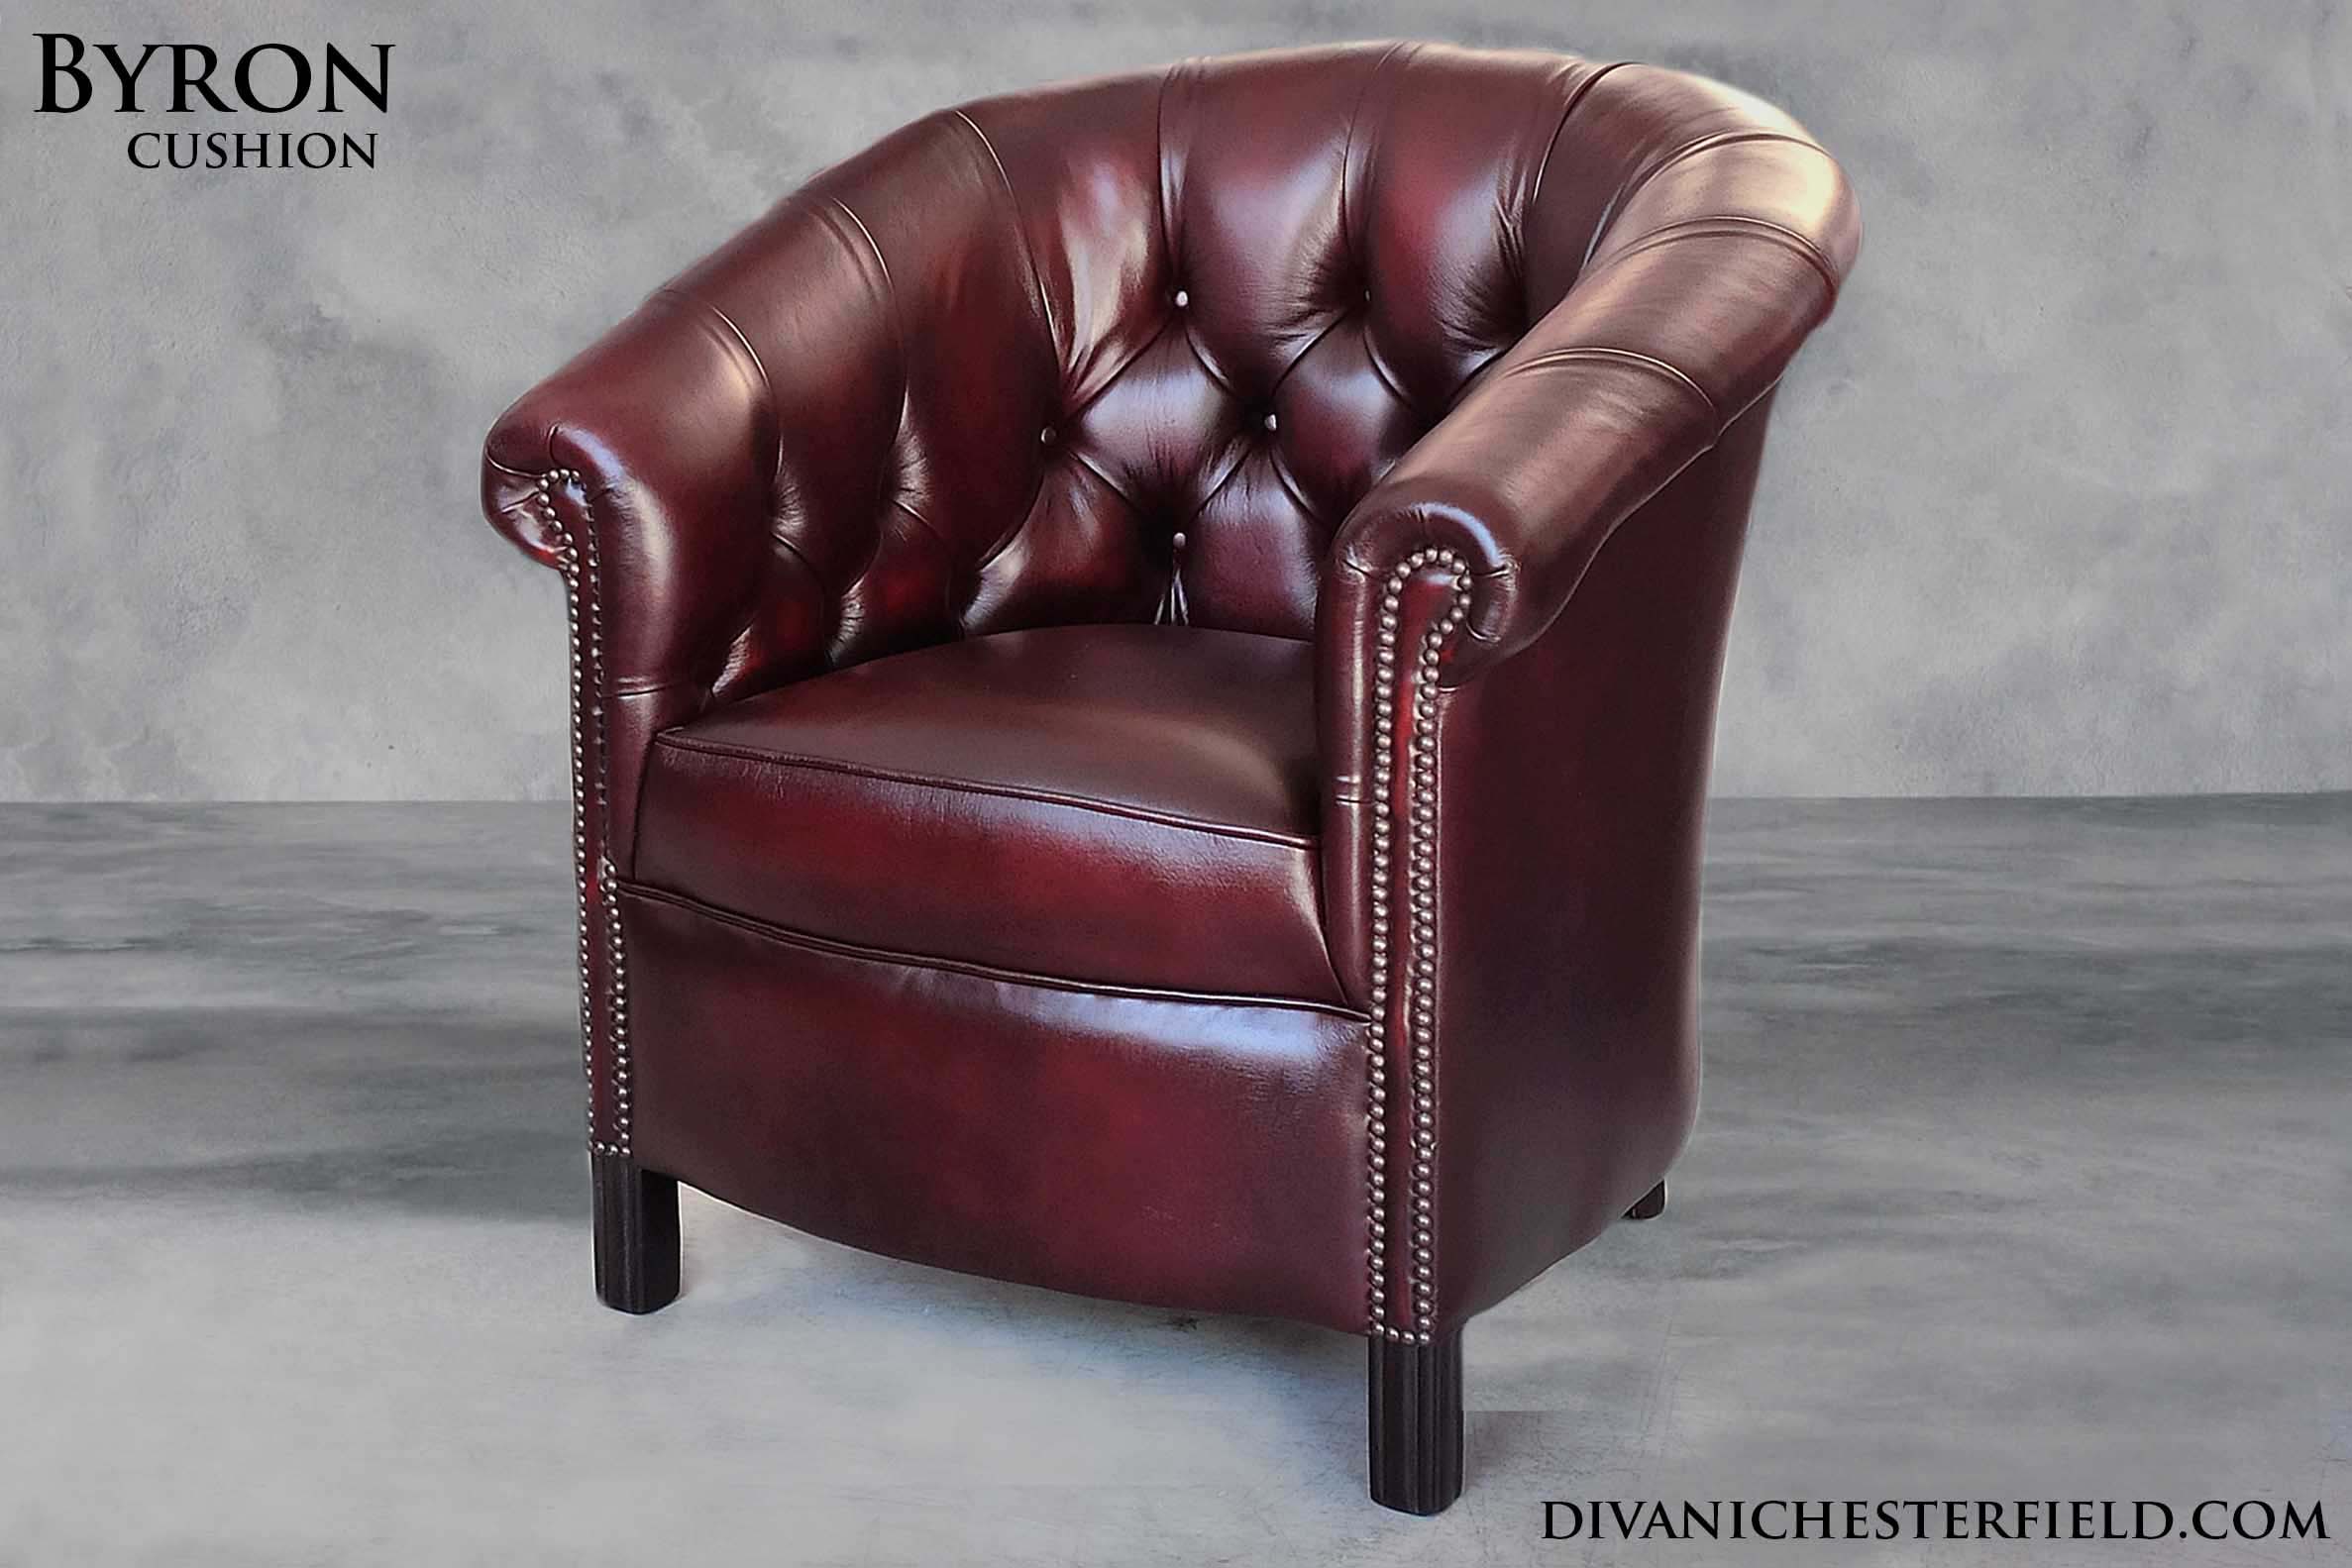 poltroncina chesterfield inglese byron cuscino pelle rossa bordeaux